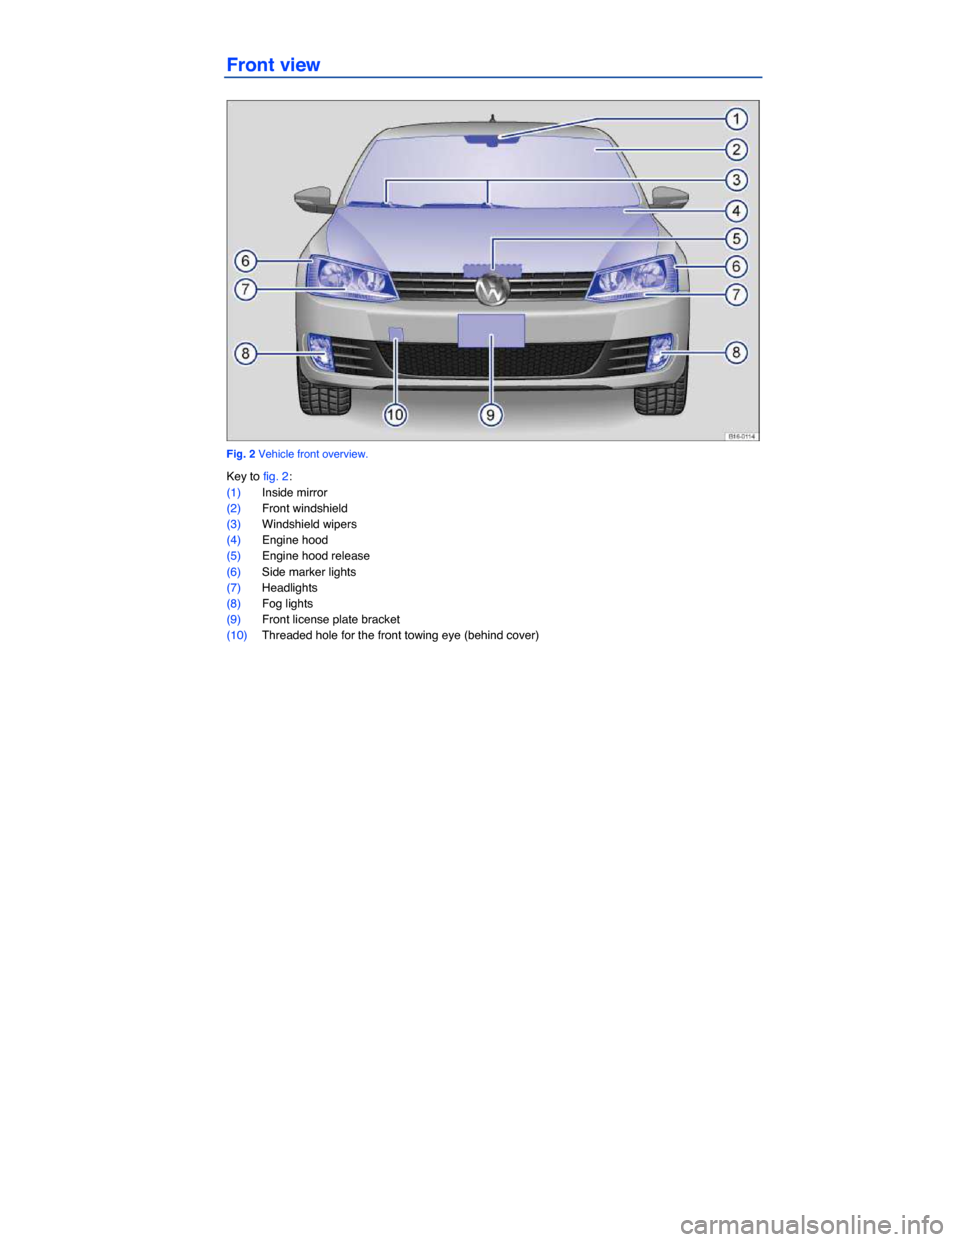 VOLKSWAGEN JETTA GLI 2013 1B / 6.G Owners Manual  
Front view 
 
Fig. 2 Vehicle front overview. 
Key to fig. 2: 
(1) Inside mirror  
(2) Front windshield 
(3) Windshield wipers  
(4) Engine hood  
(5) Engine hood release  
(6) Side marker lights 
(7